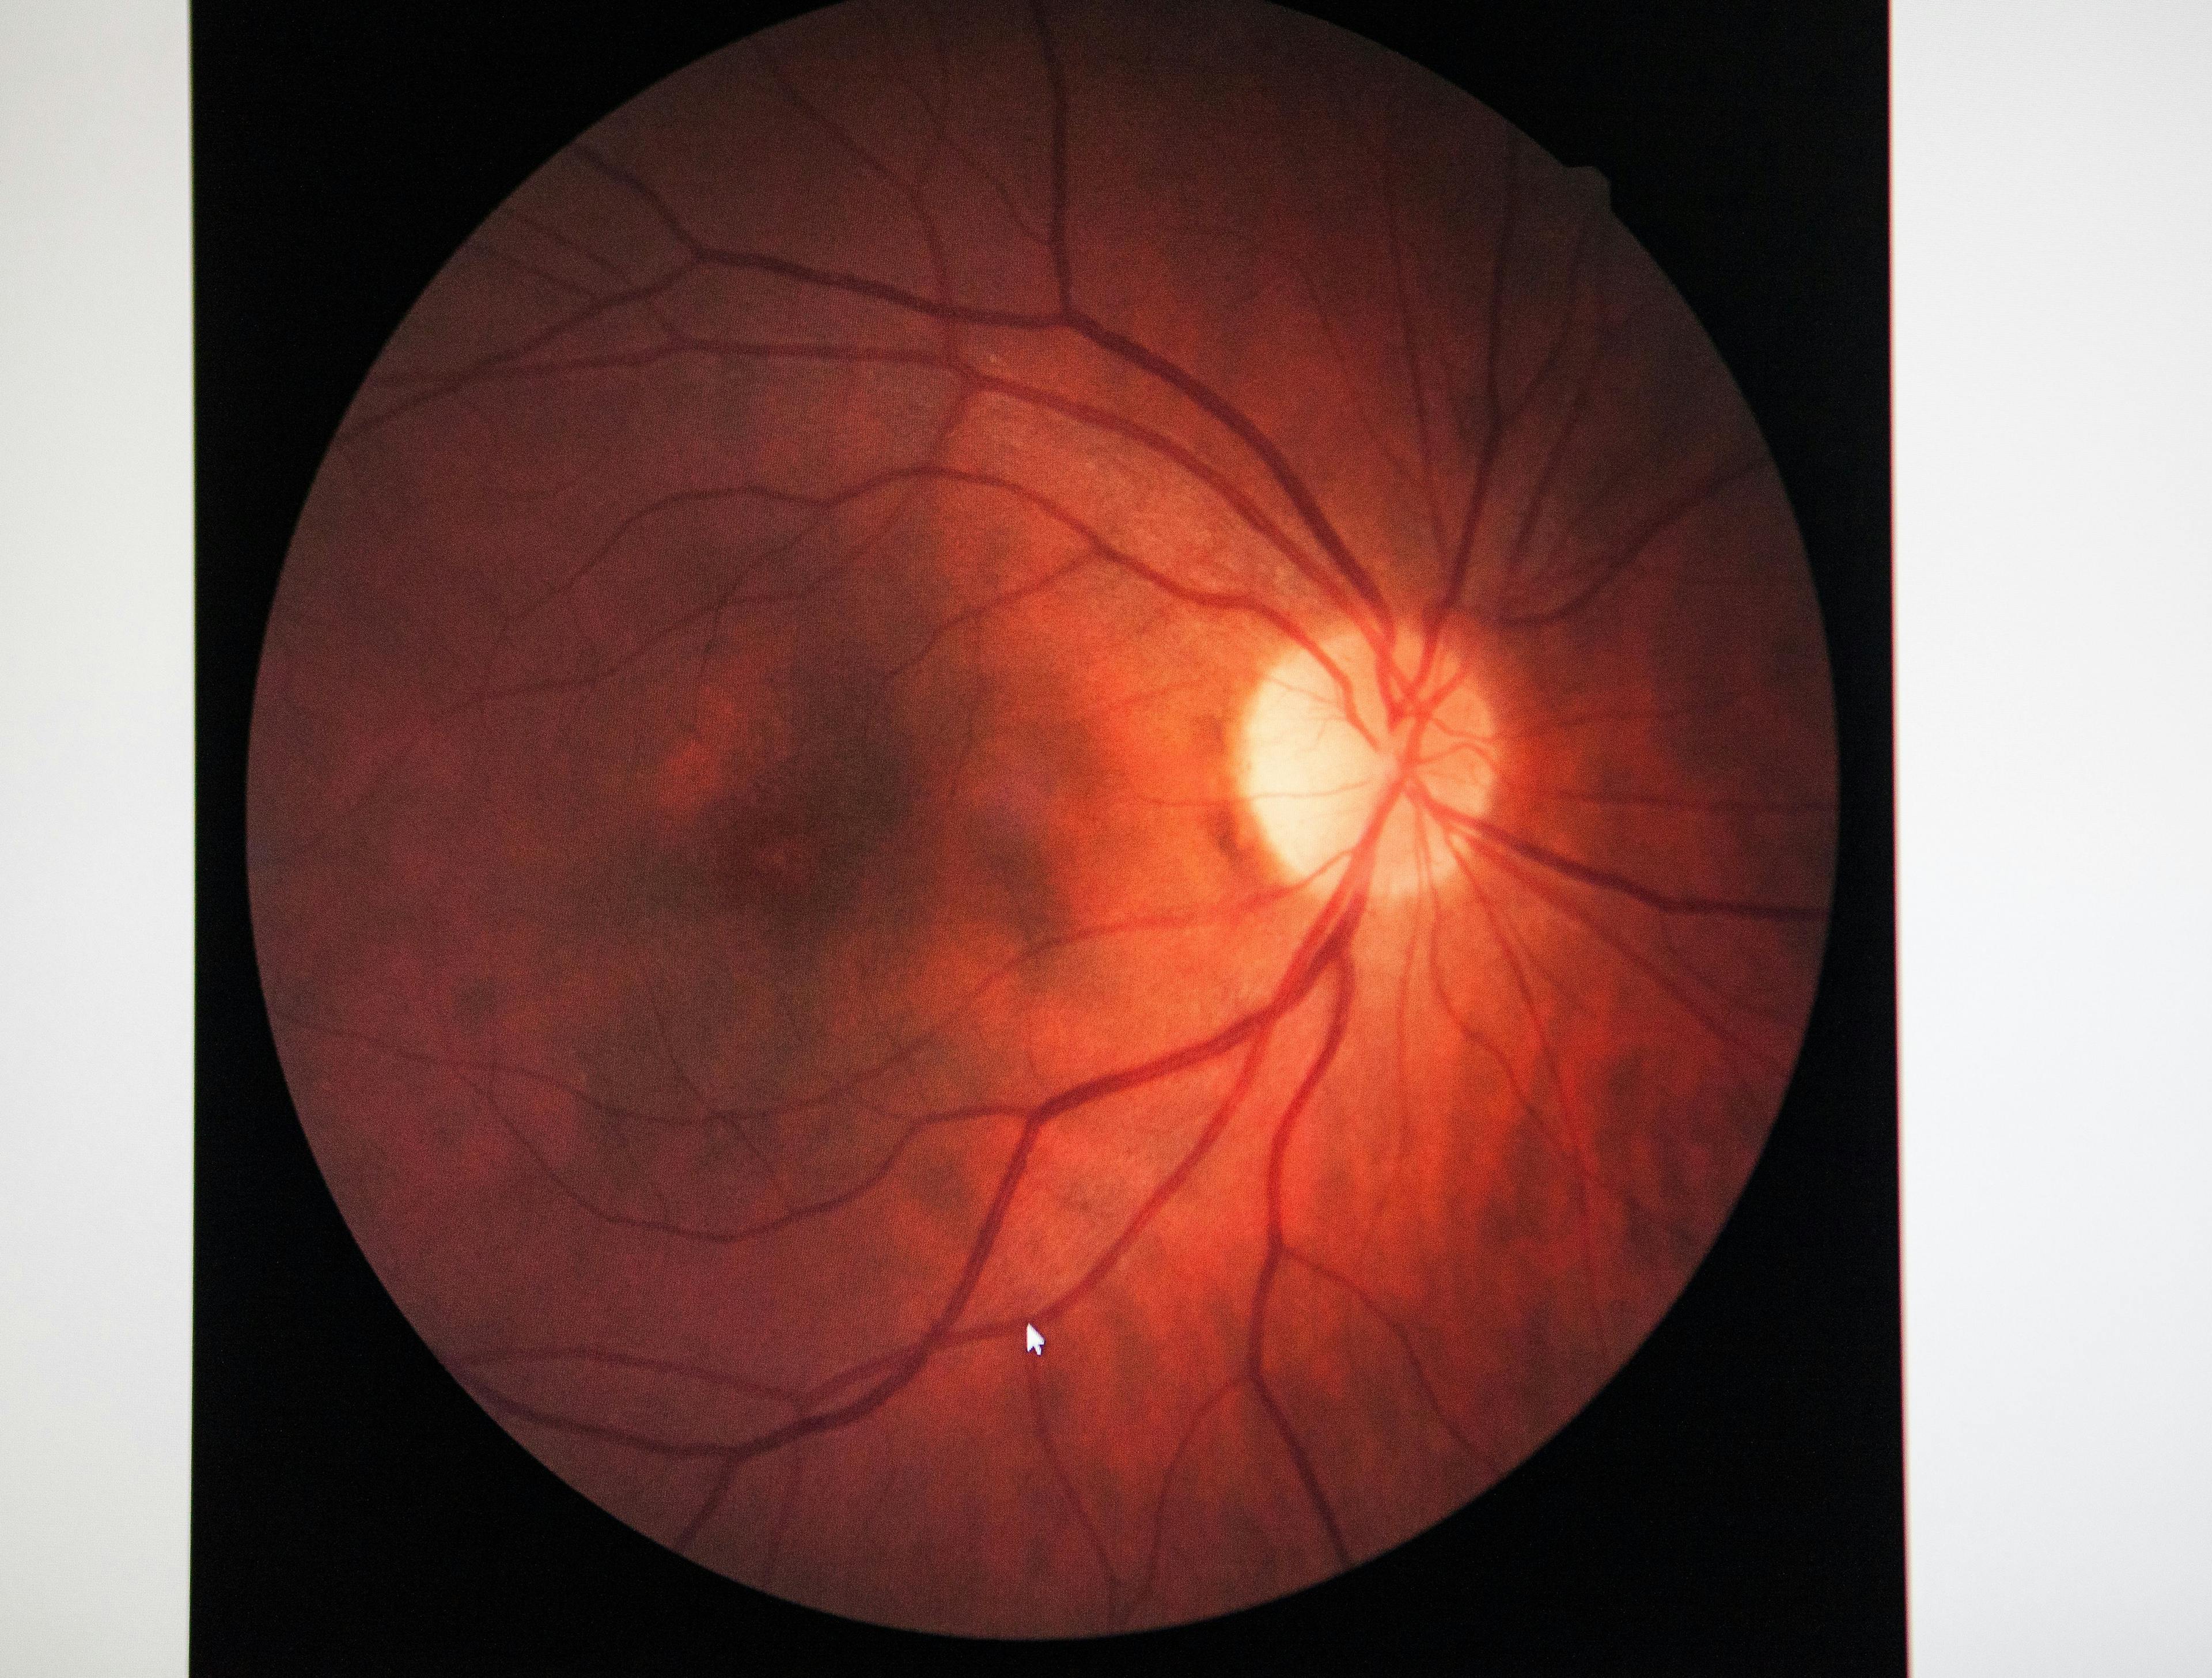  Positive Long-term Results Seen with Vabysmo in Retinal Vein Occlusion